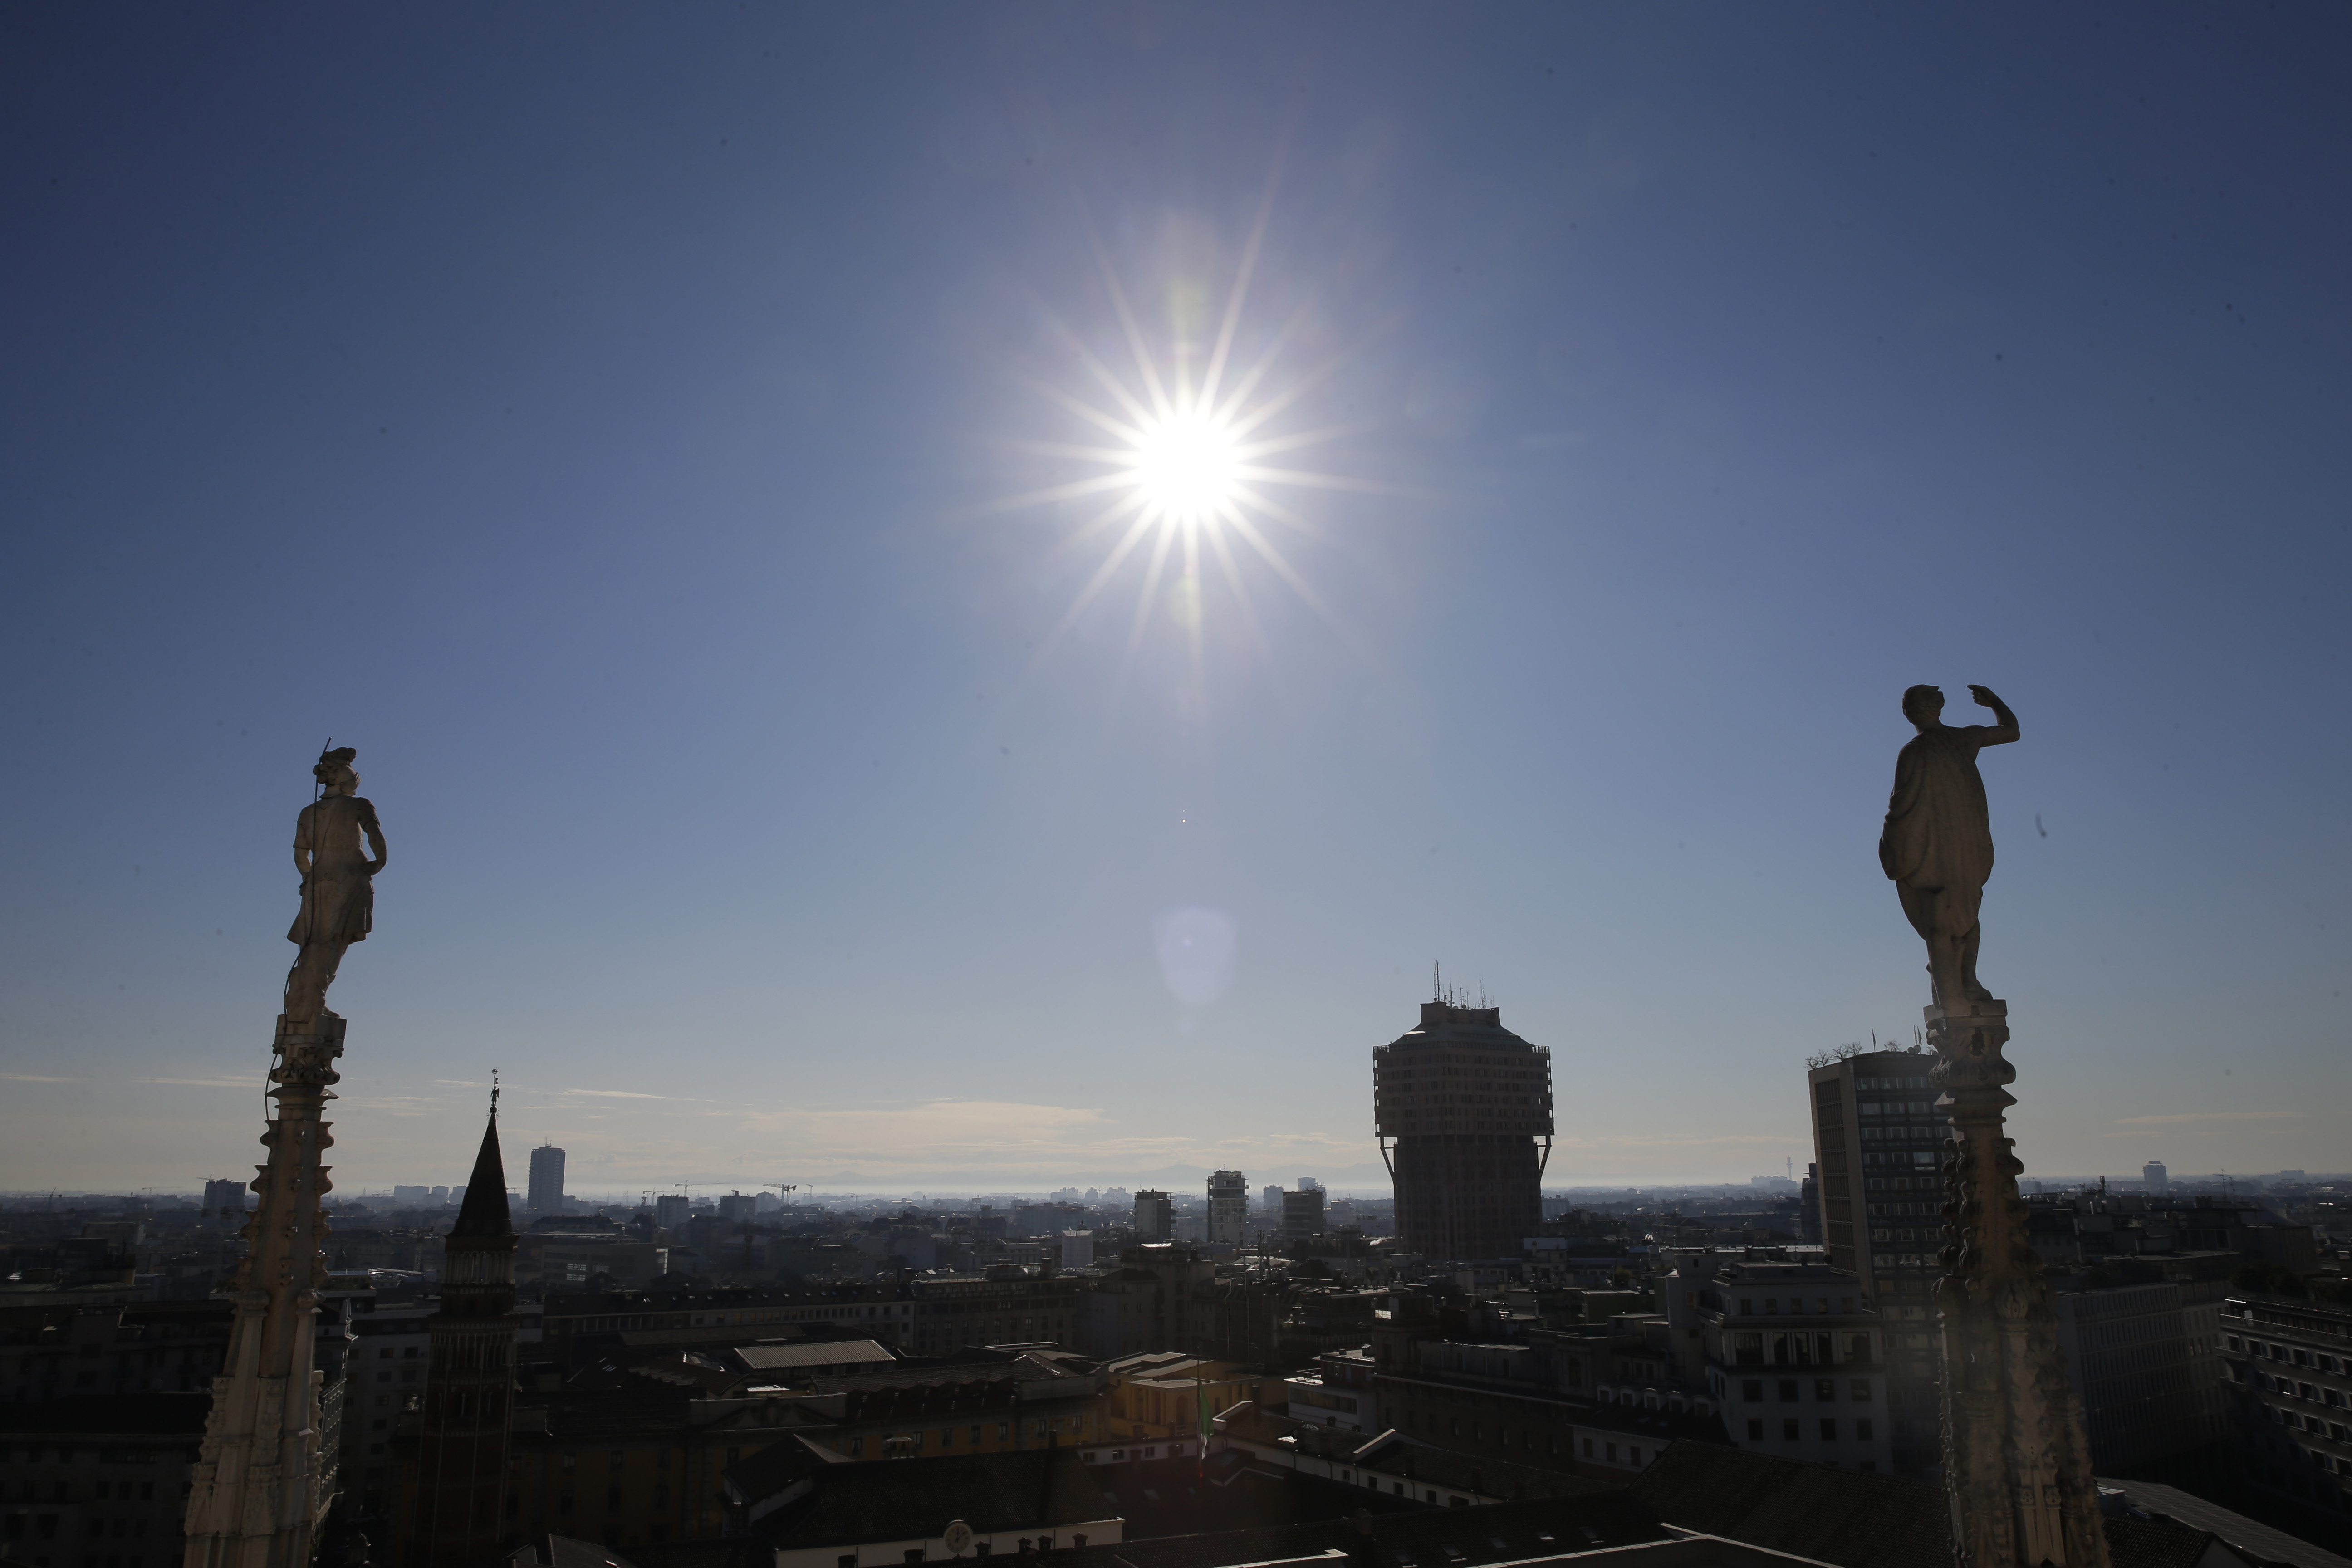 A skyline of Milan, Italy, as seen from the Duomo gothic cathedral, Sunday Jan. 25, 2015. (AP Photo/Luca Bruno)